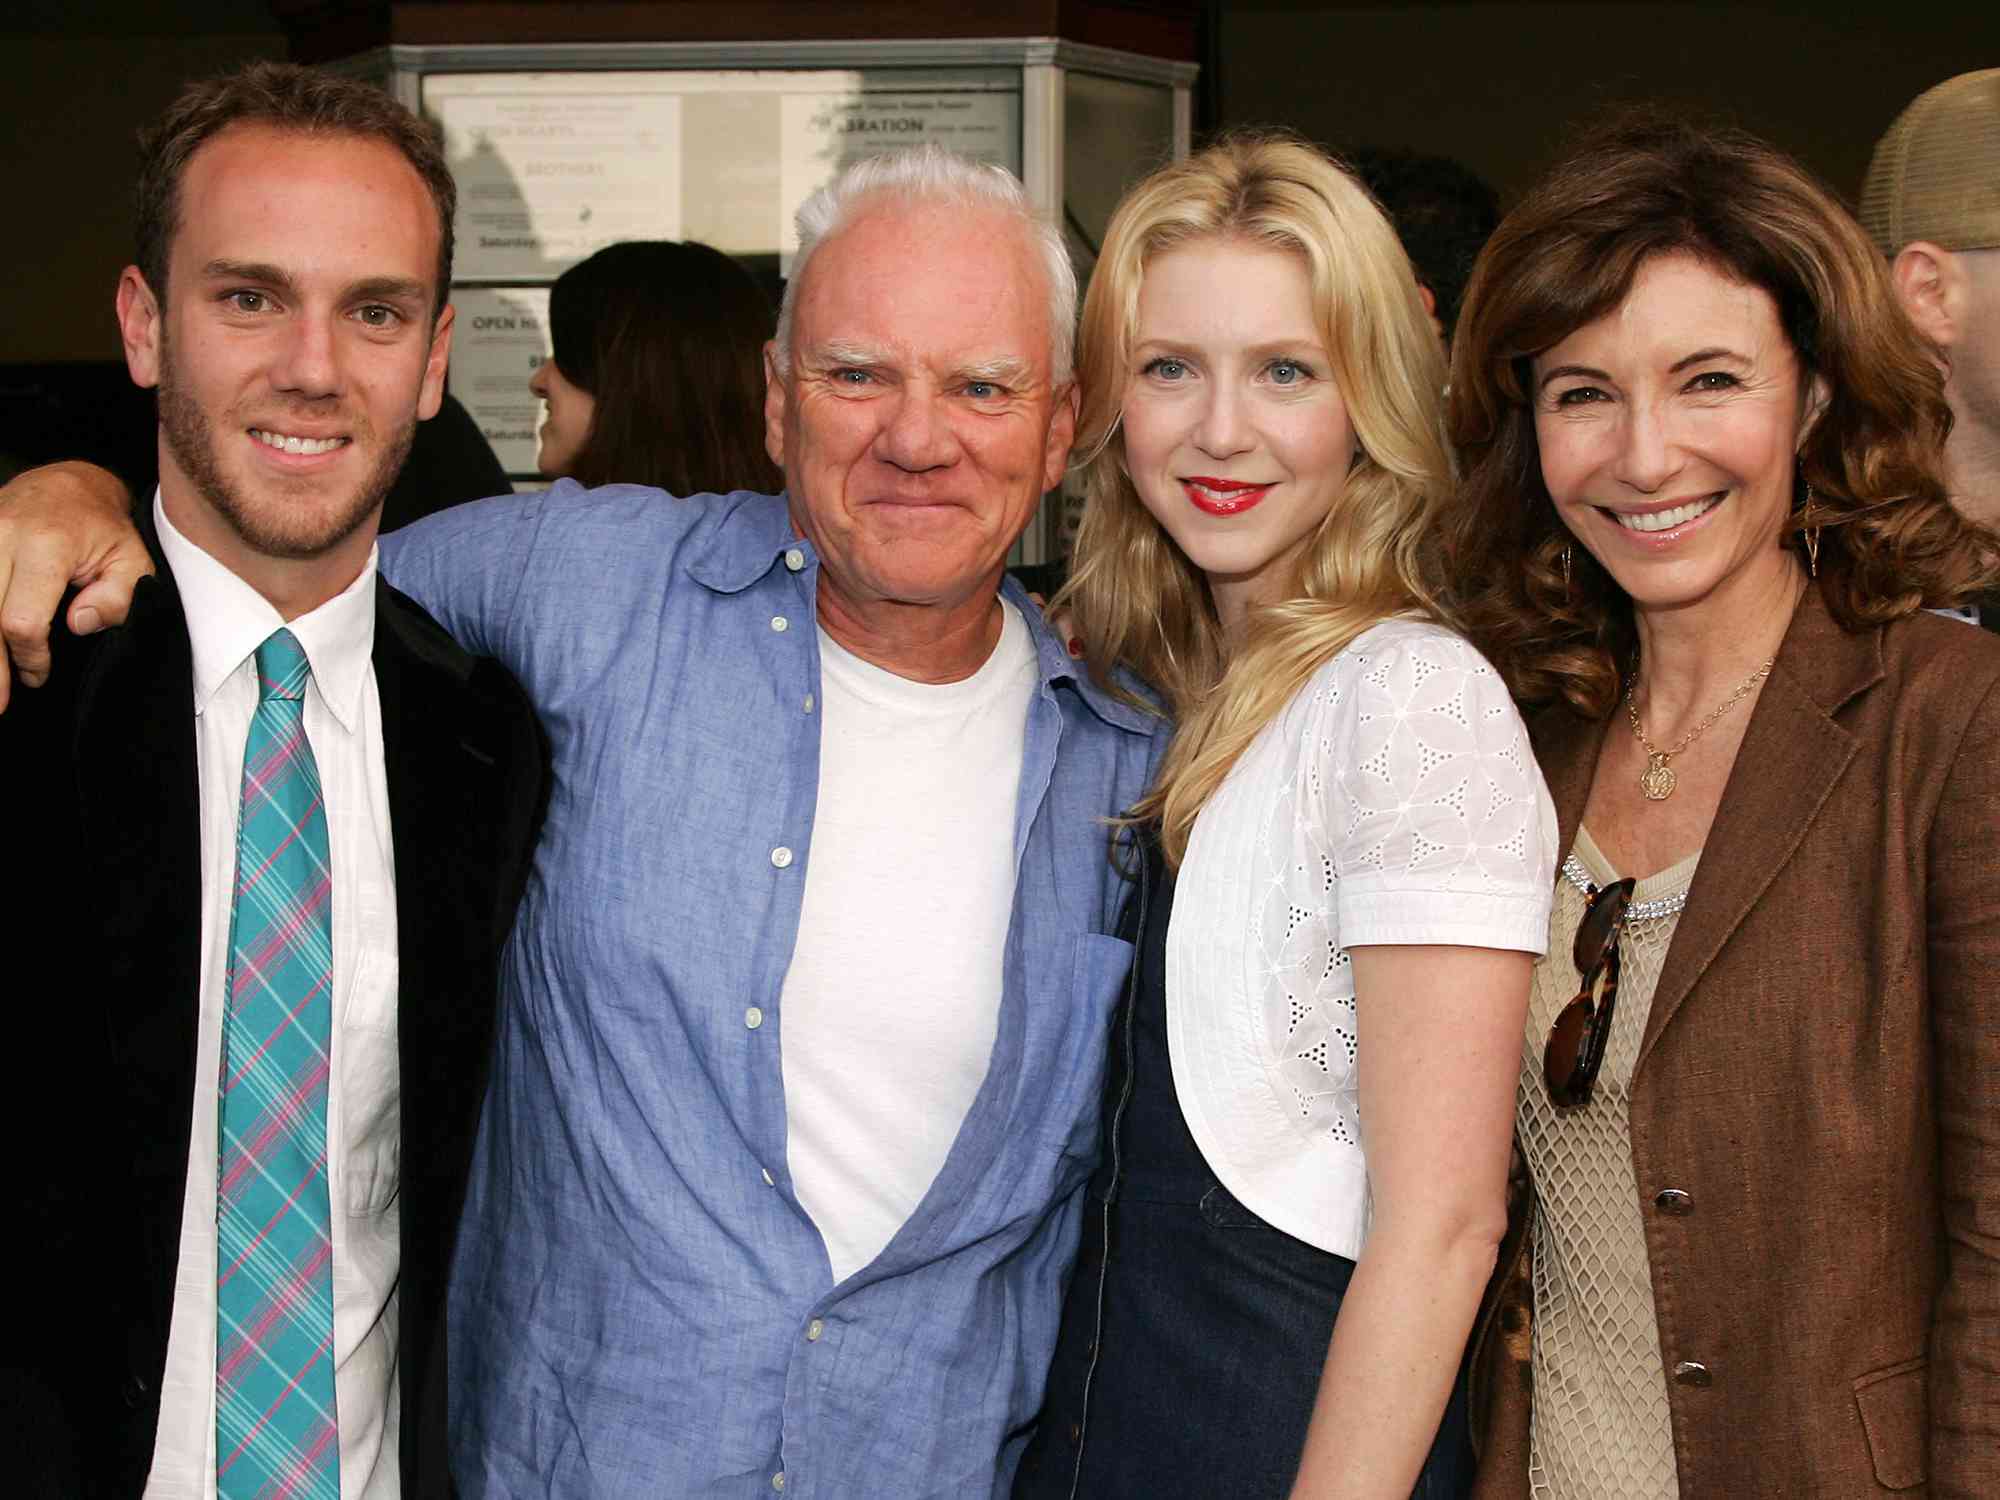 Malcolm McDowell and Mary Steenburgen pose with their son Charlie McDowell and daughter Lilly McDowell at the premiere of the short film "Bye Bye Benjamin" on June 5, 2006. 